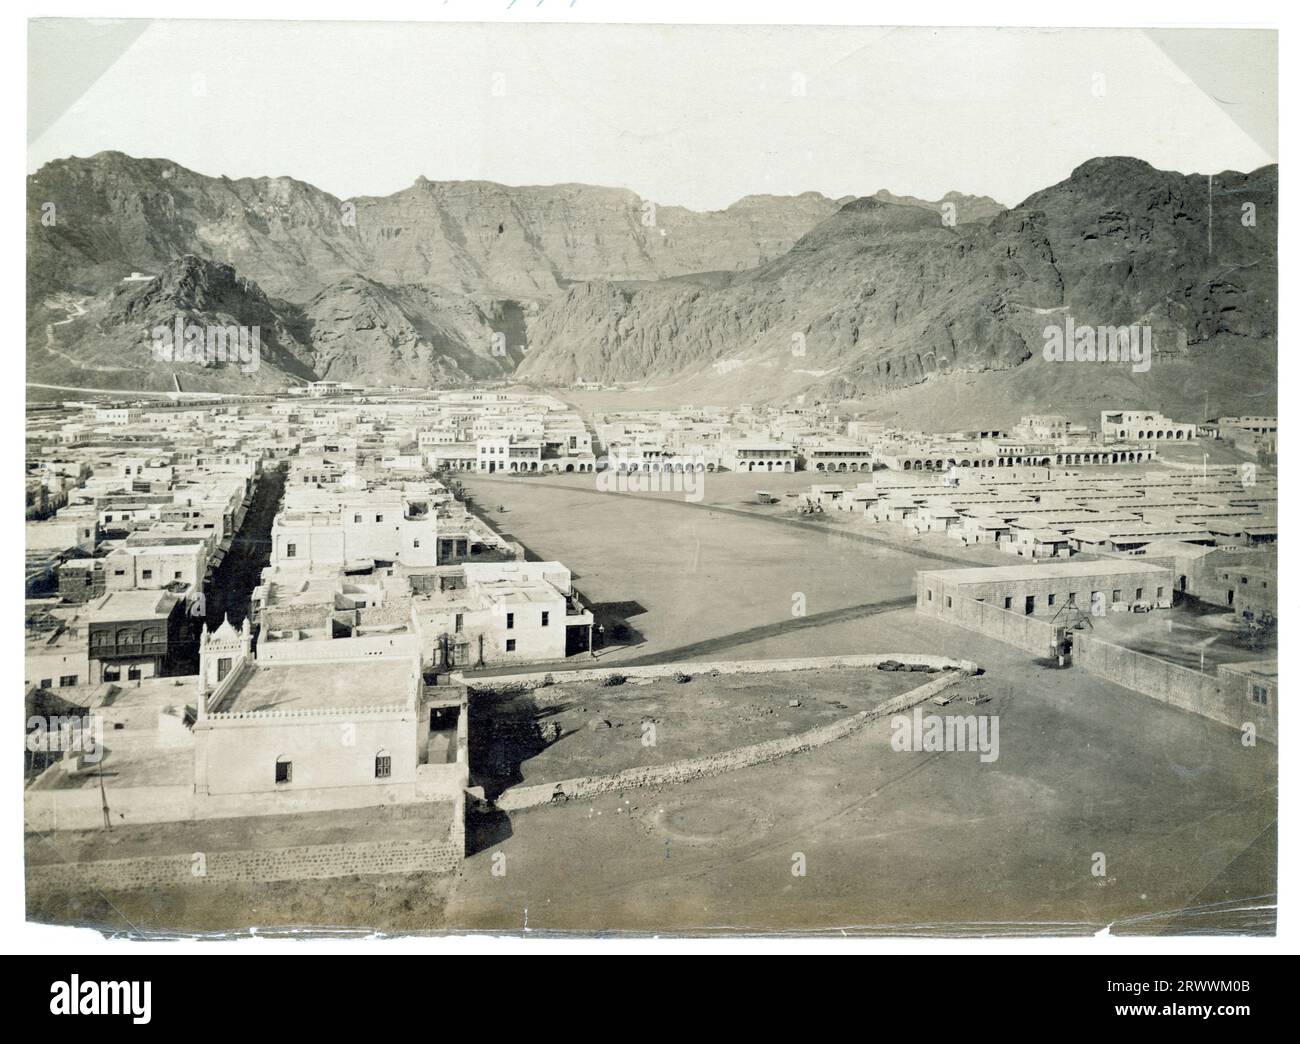 View of Aden, taken from a high vantage point with rocky mountains in the background. The buildings within the city are laid out in a grid-like formation. Caption reads: Aden. Stock Photo